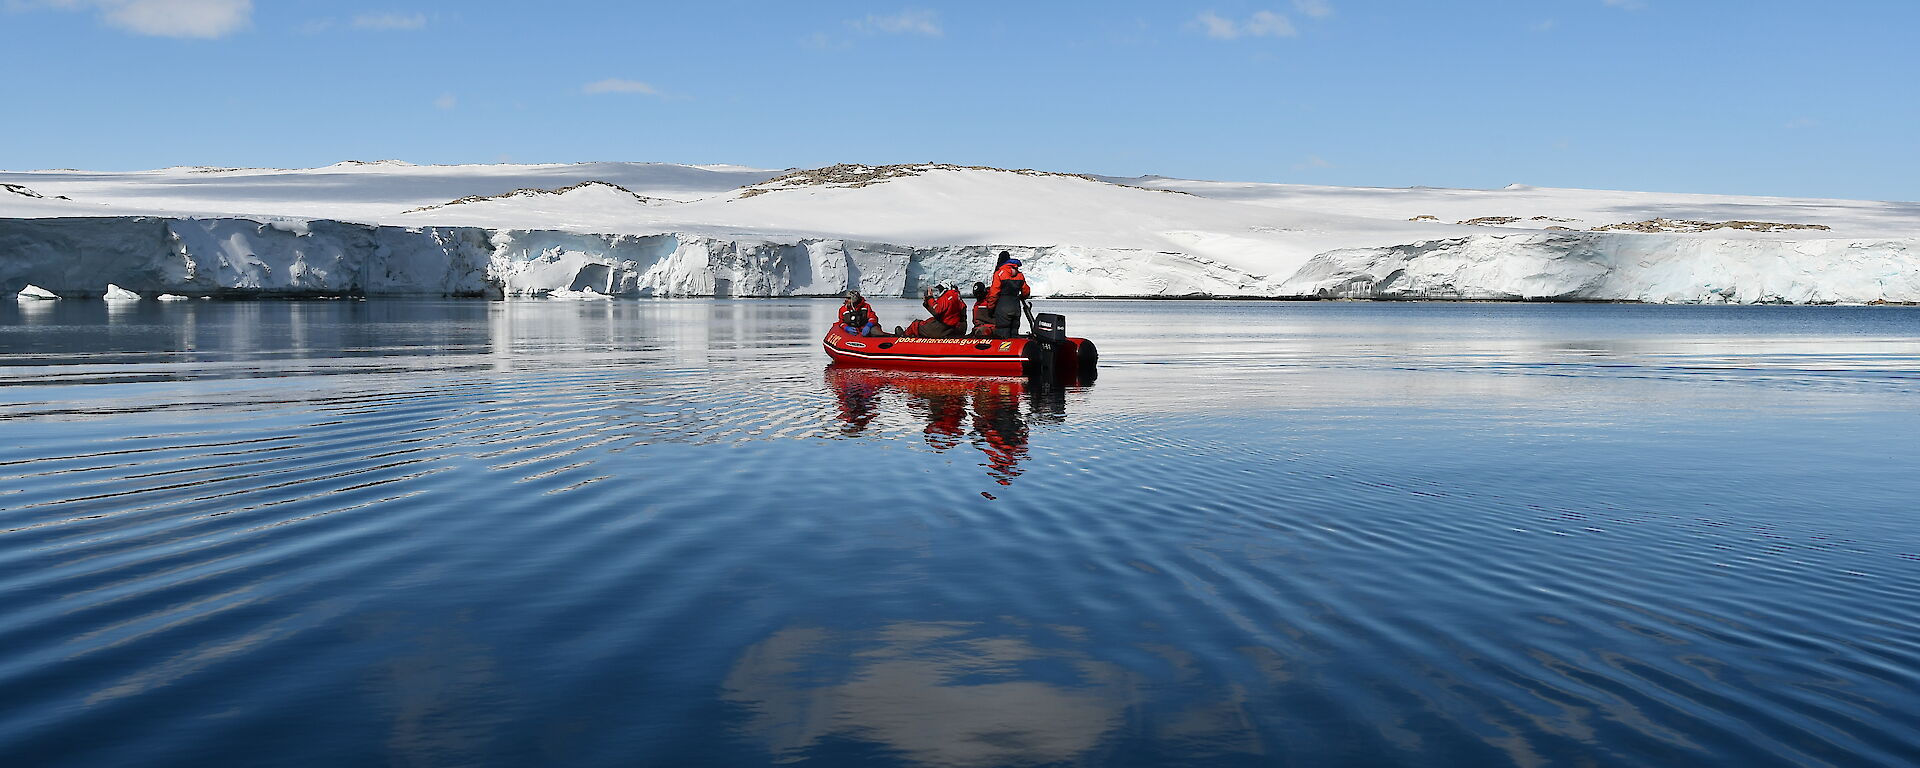 A red inflatable boat with five people in the middle of a blue bay surrounded by white ice cliffs.